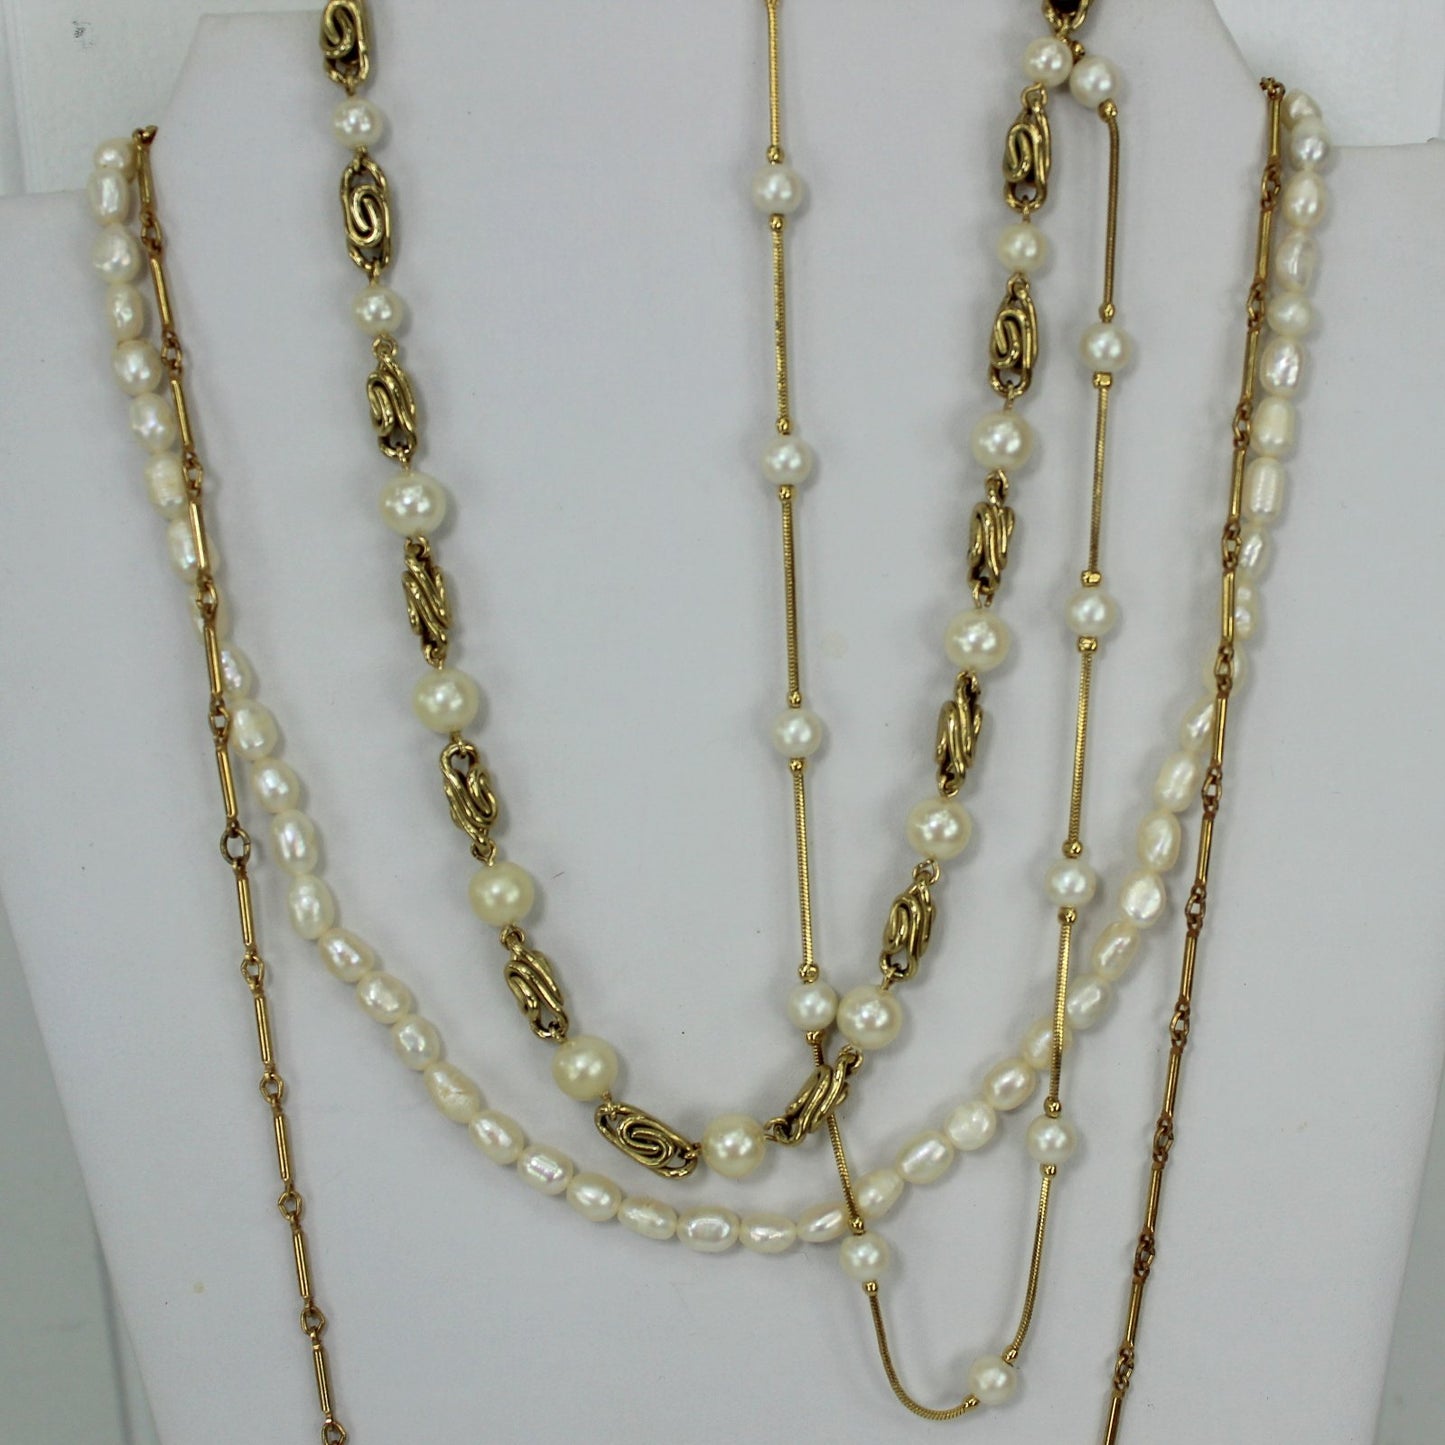 Lot Collection 15 Vintage Necklaces Pearls Bold Choker Multi Strand Unmarked gold tone with pearls and plain chain